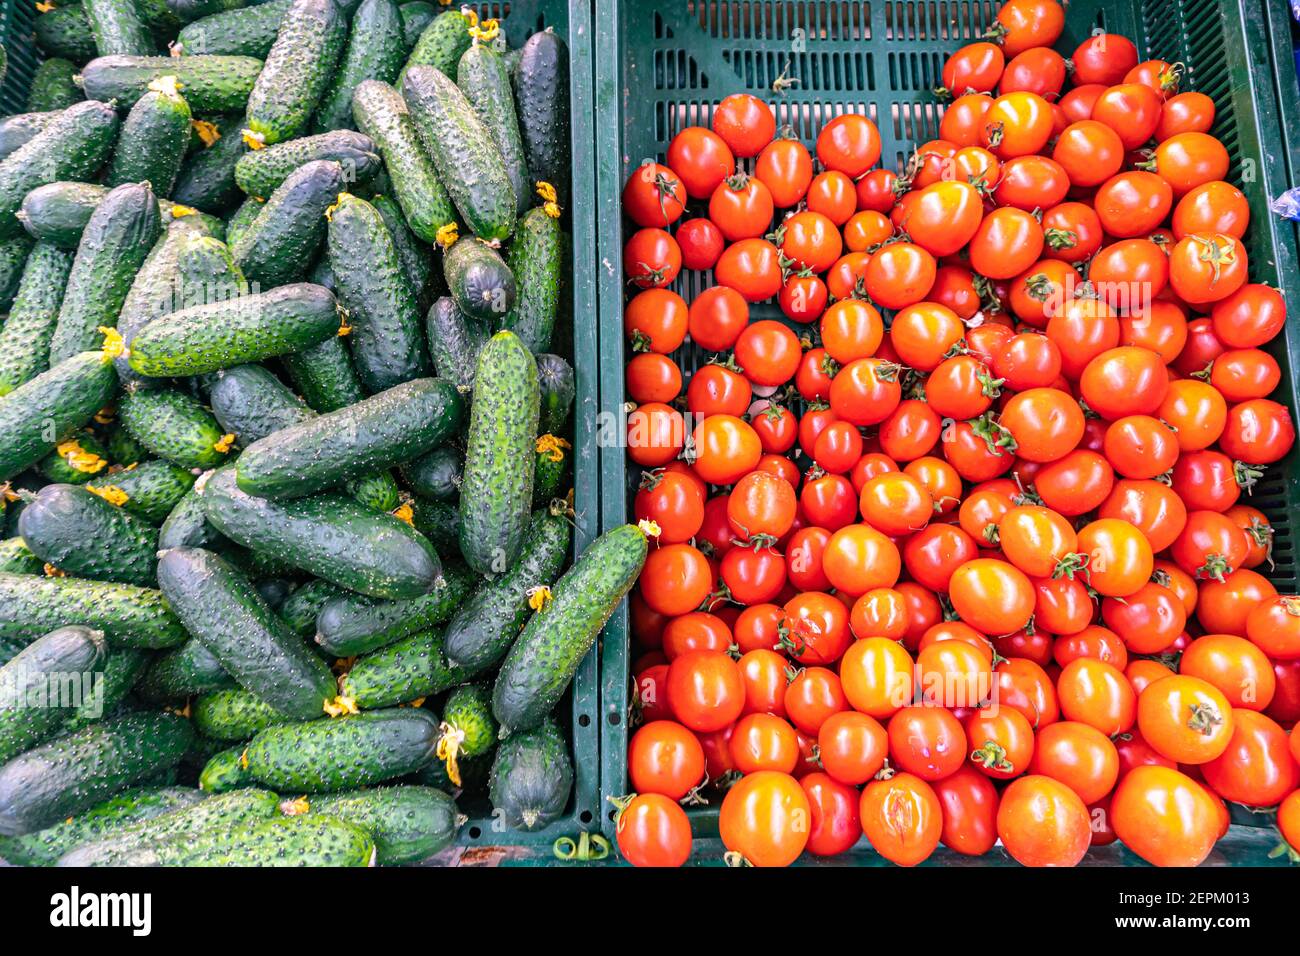 https://c8.alamy.com/comp/2EPM013/a-farm-stand-display-of-organic-vegetables-produce-tomatoes-and-cucumbers-vegetable-stall-at-the-market-2EPM013.jpg